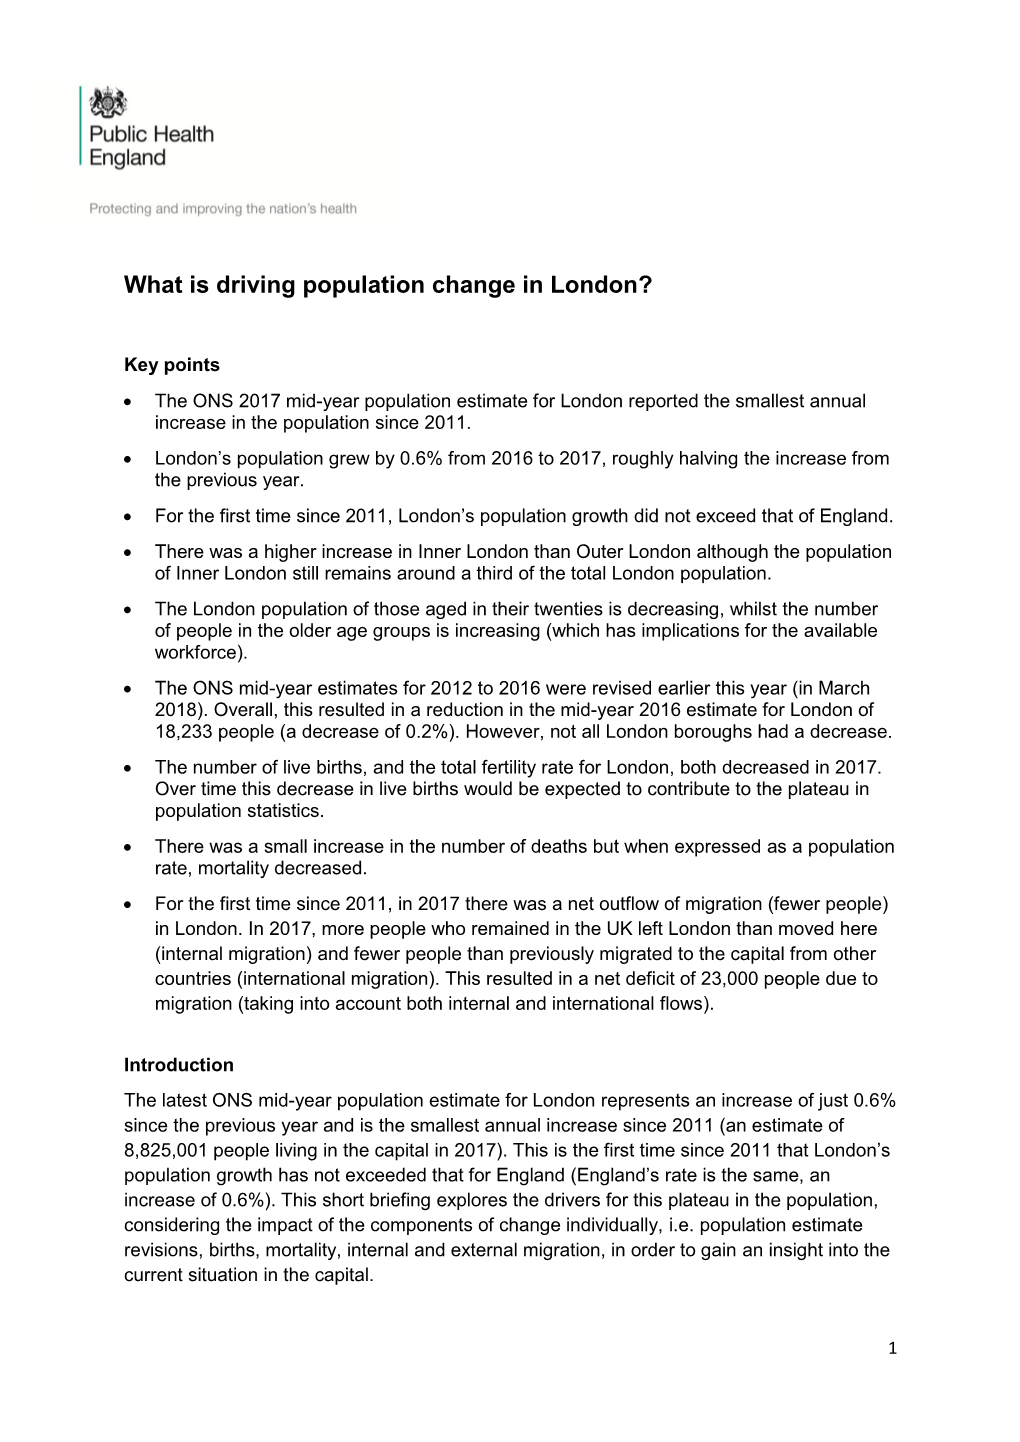 What Is Driving Population Change in London?